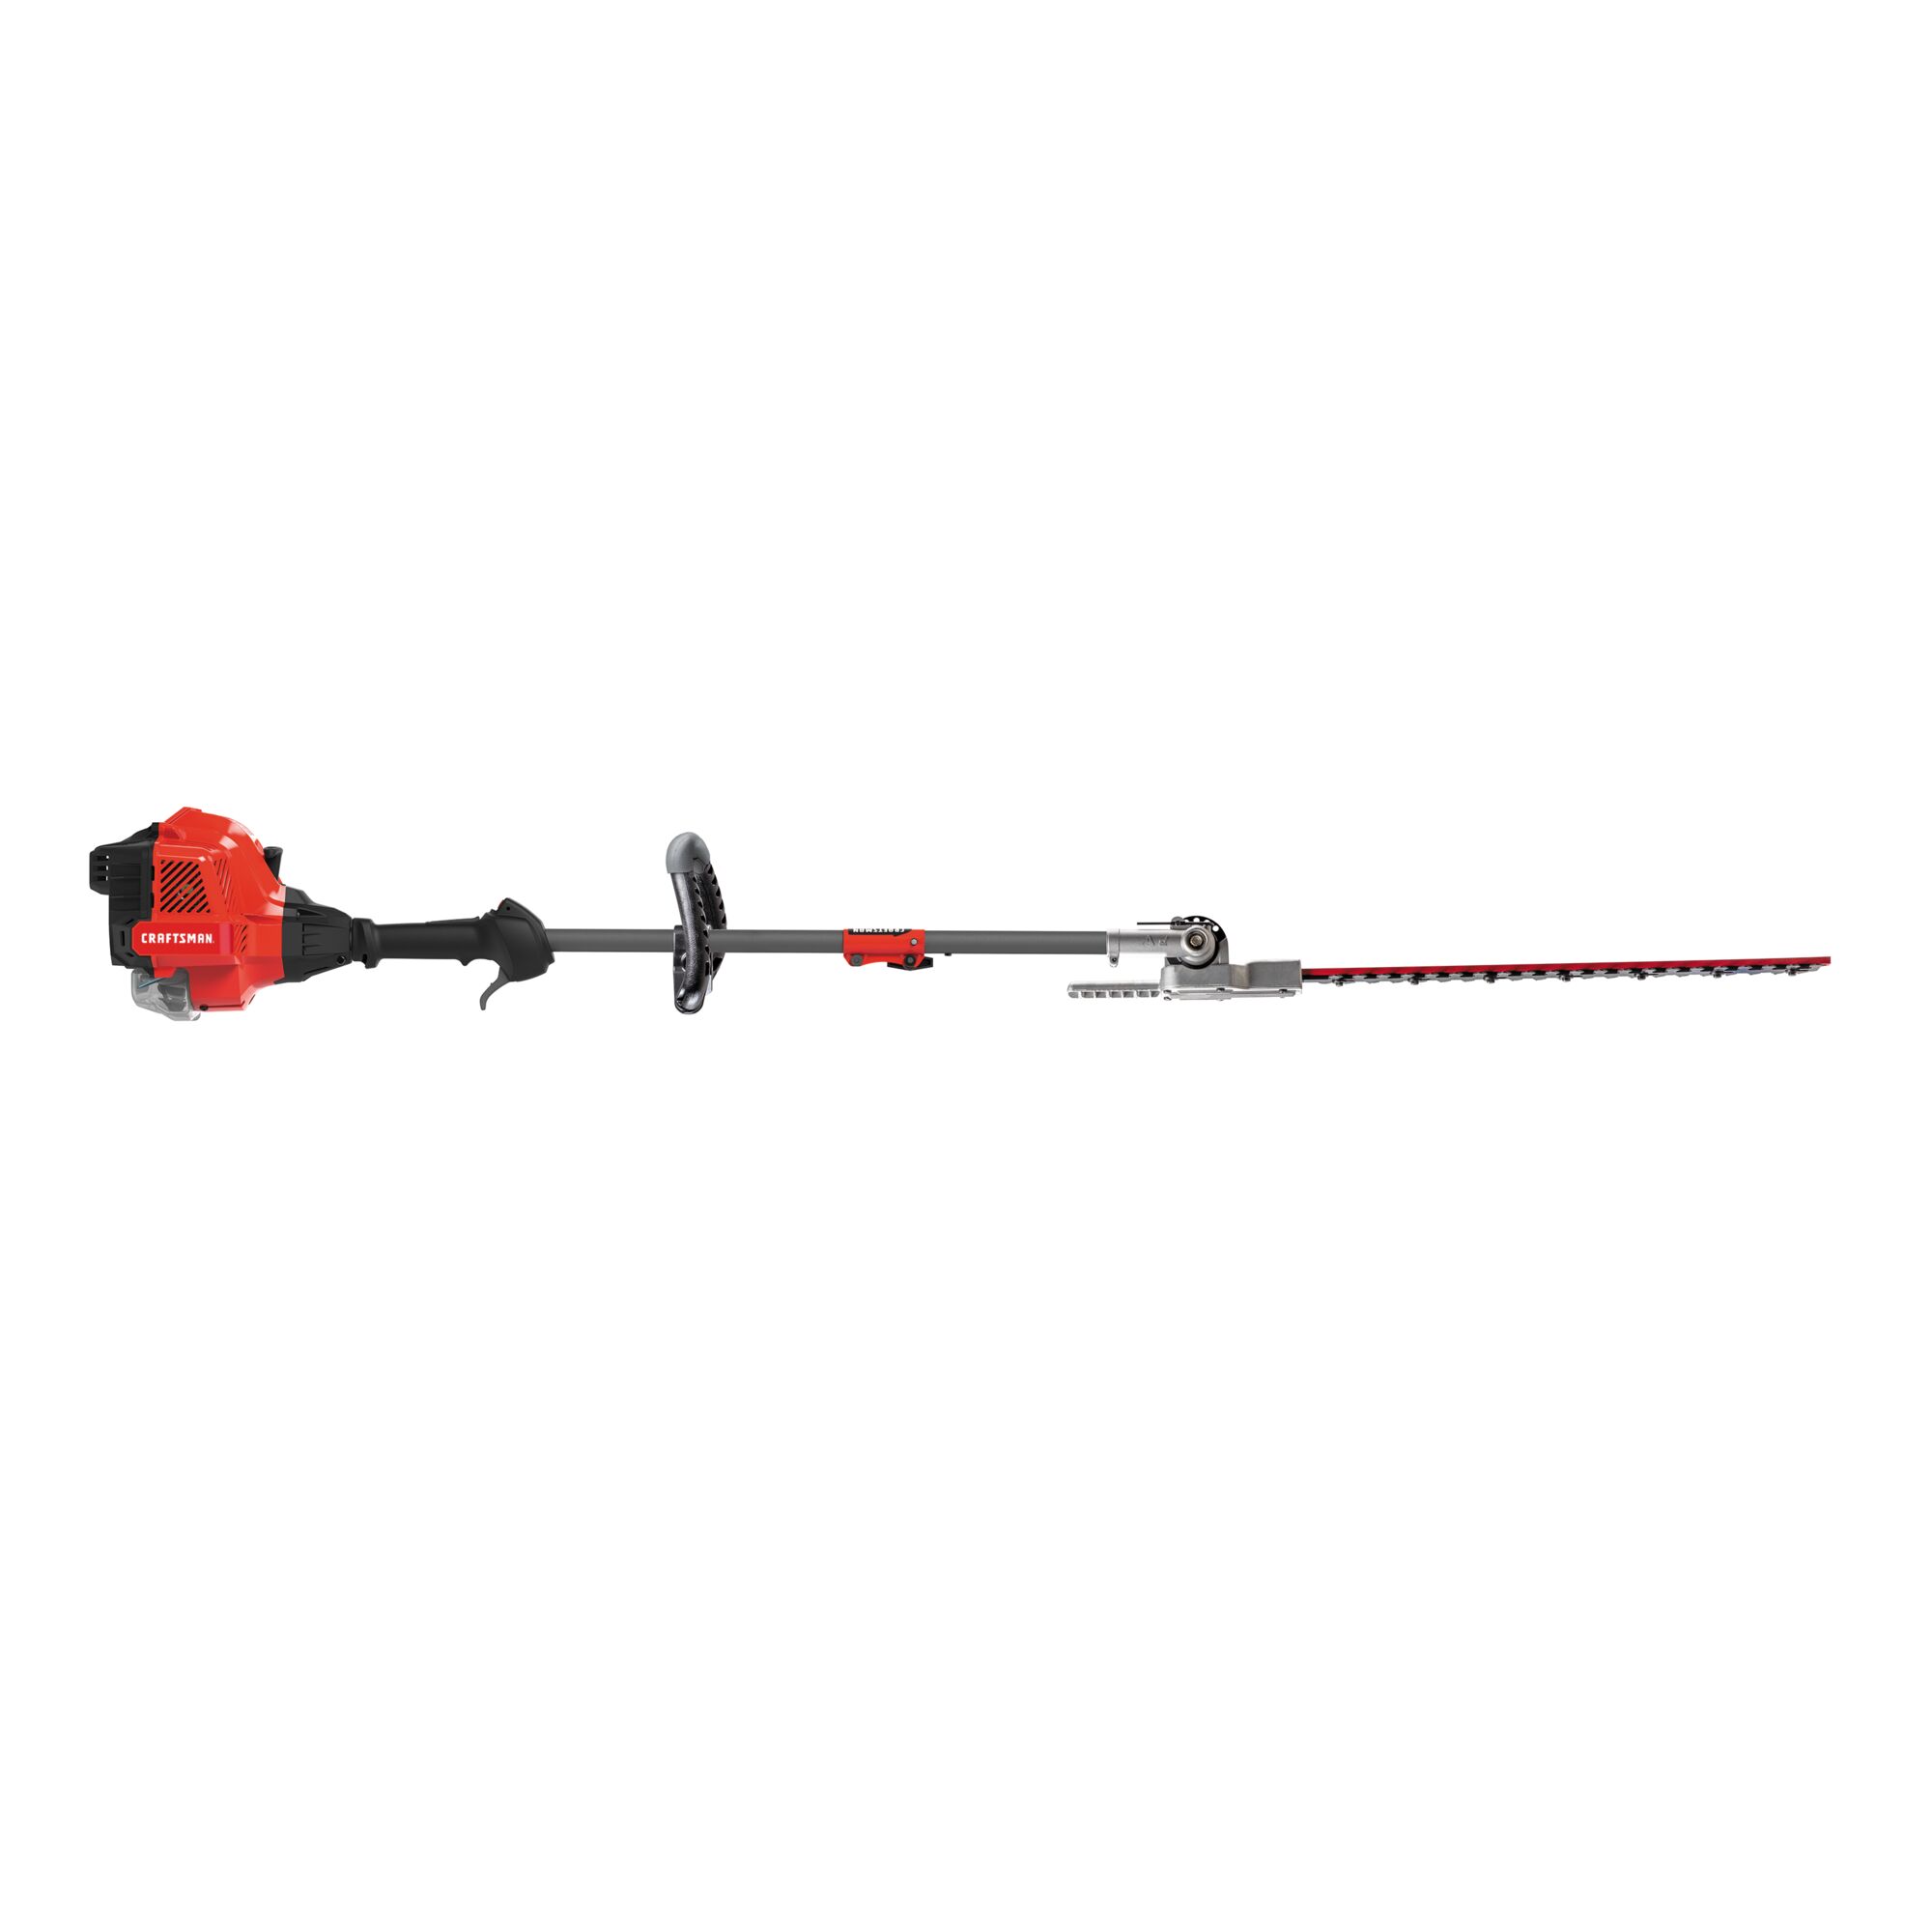 Left profile of HT2200 25CC 2 cycle 22 inch attachment capable gas hedge trimmer.